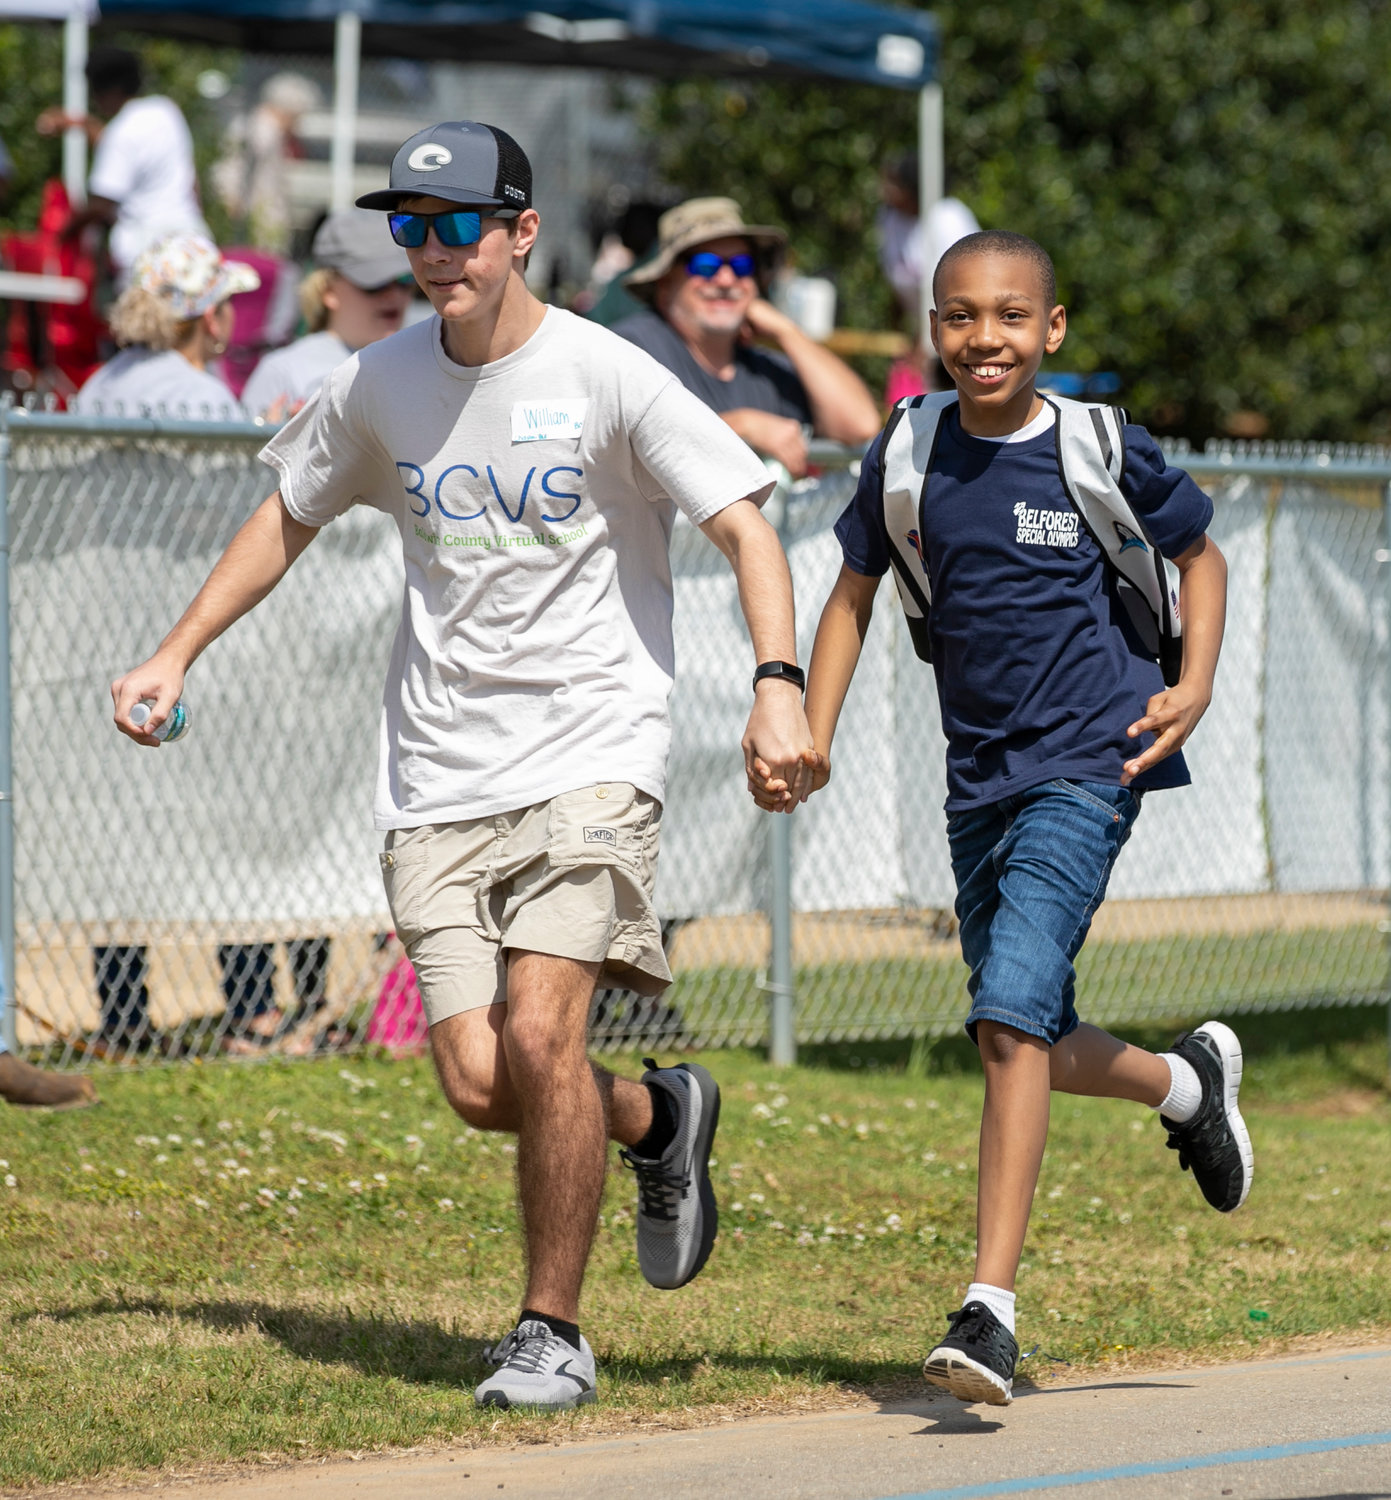 Students from Baldwin County Virtual School and Belforest Elementary teamed up to compete in the Spring Games Thursday in Fairhope to show off their months-long efforts on the track and field.